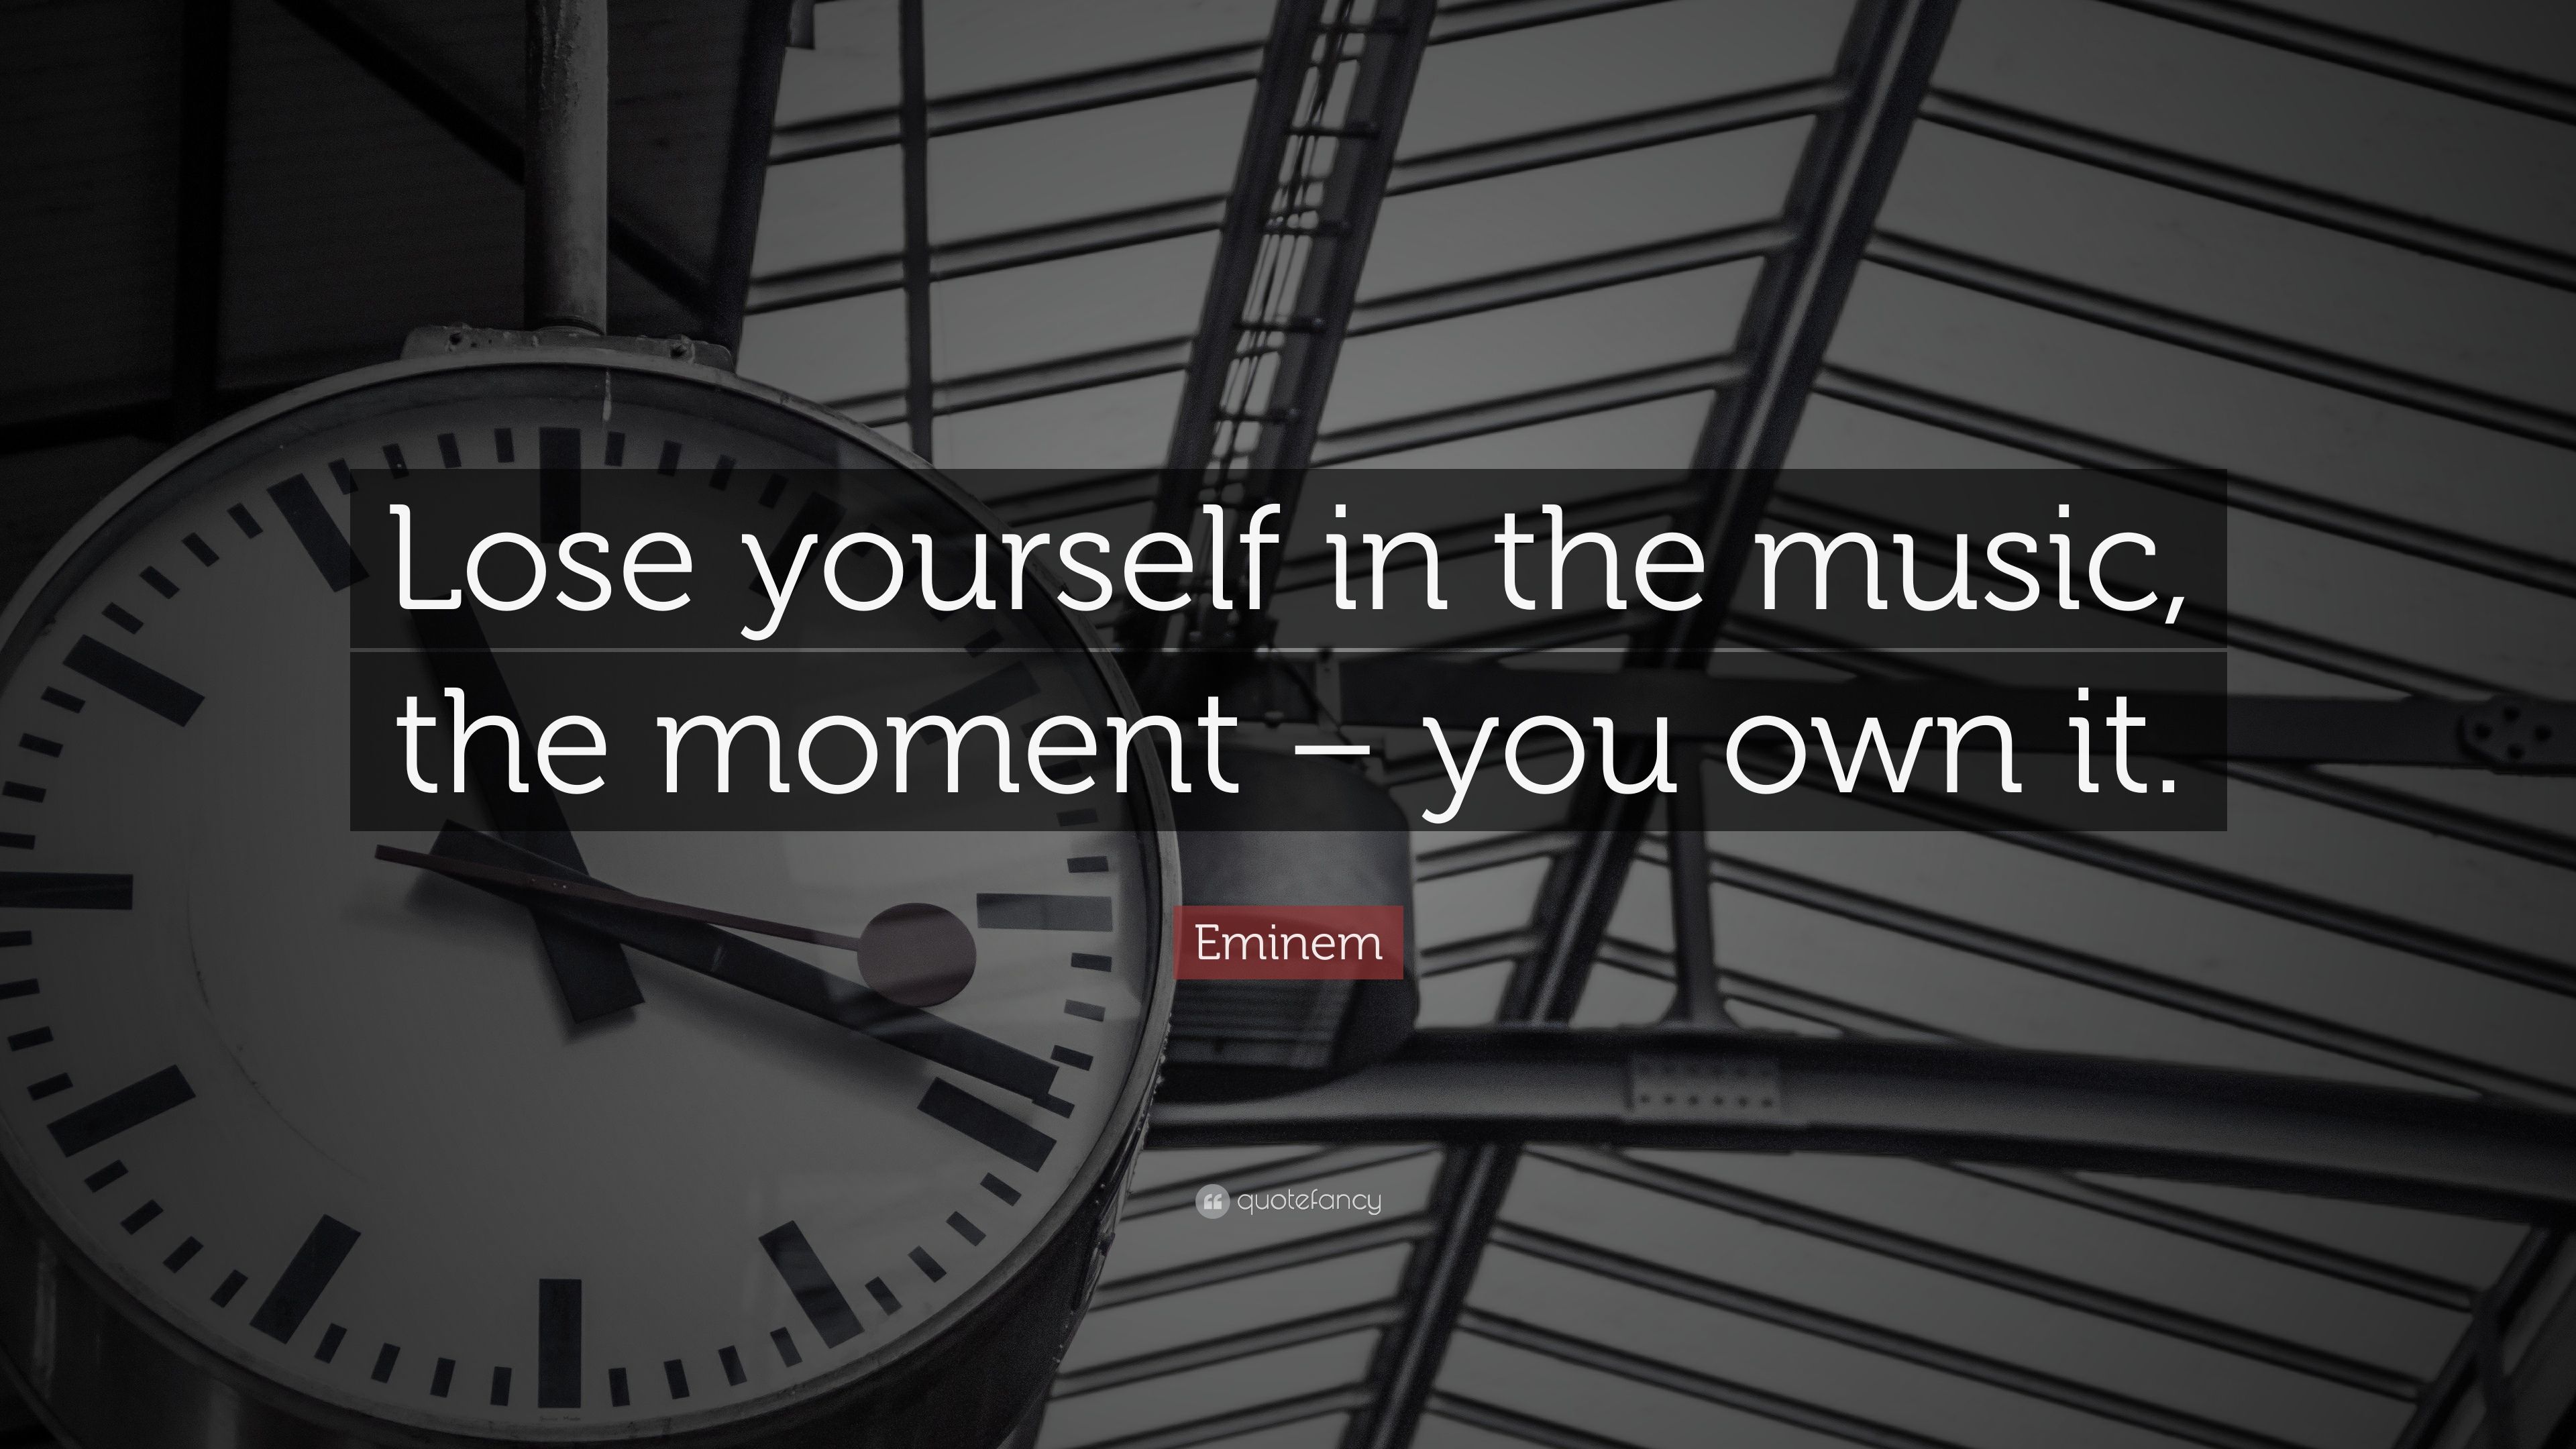 Eminem Quote: “Lose yourself in the music, the moment